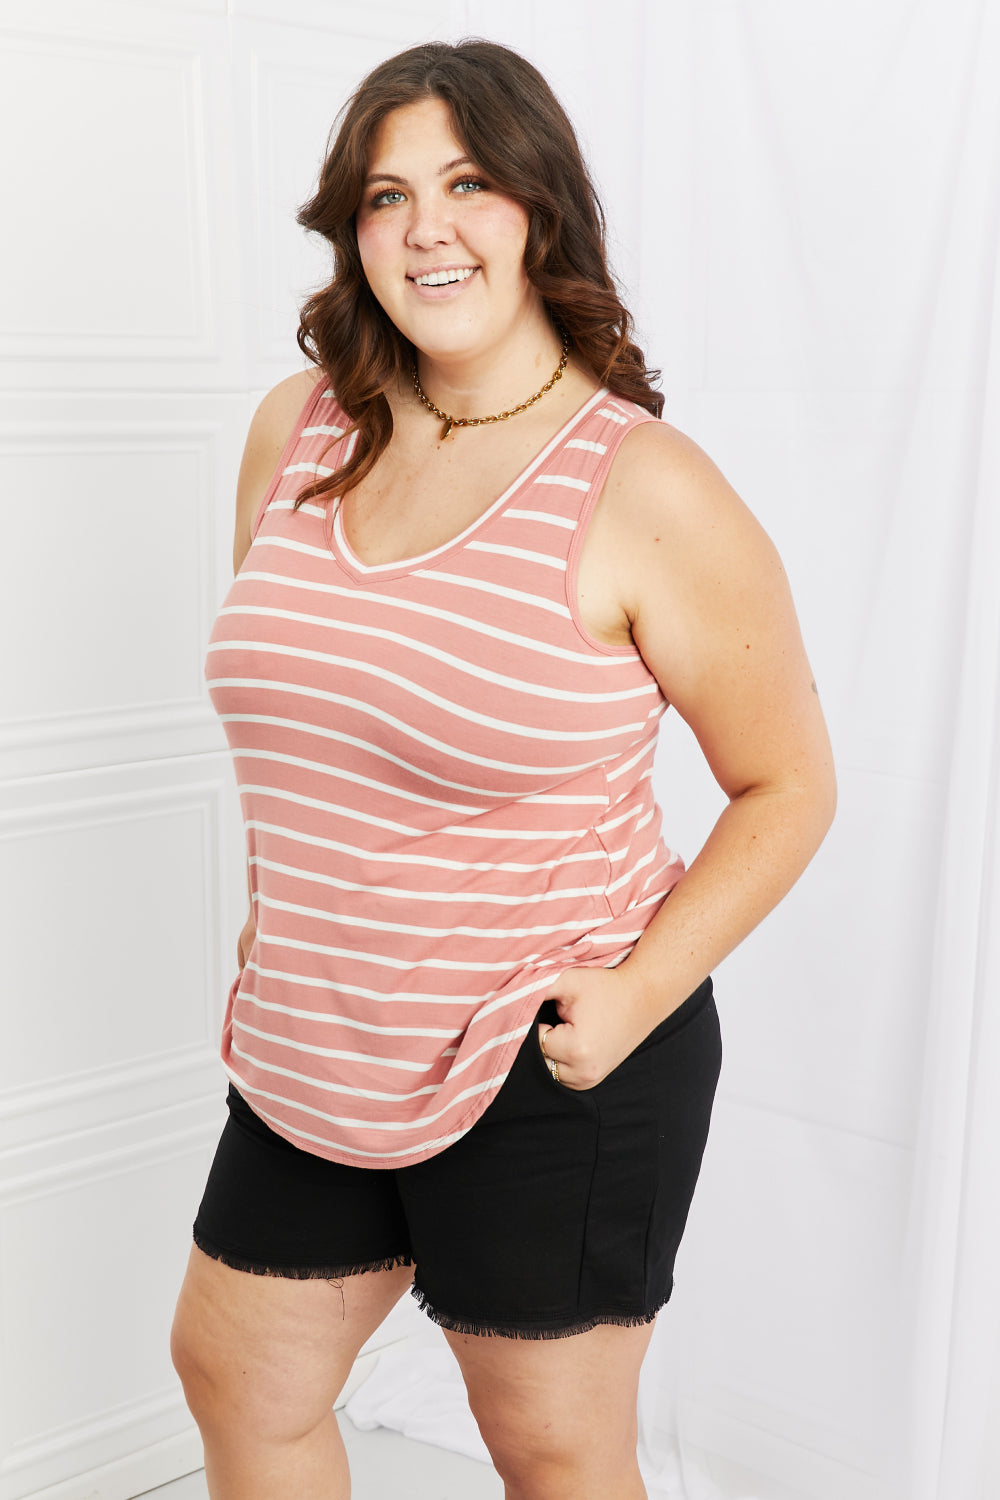 Find Your Path Full Size Sleeveless Striped Top - Pink / S - Women’s Clothing & Accessories - Shirts & Tops - 1 - 2024